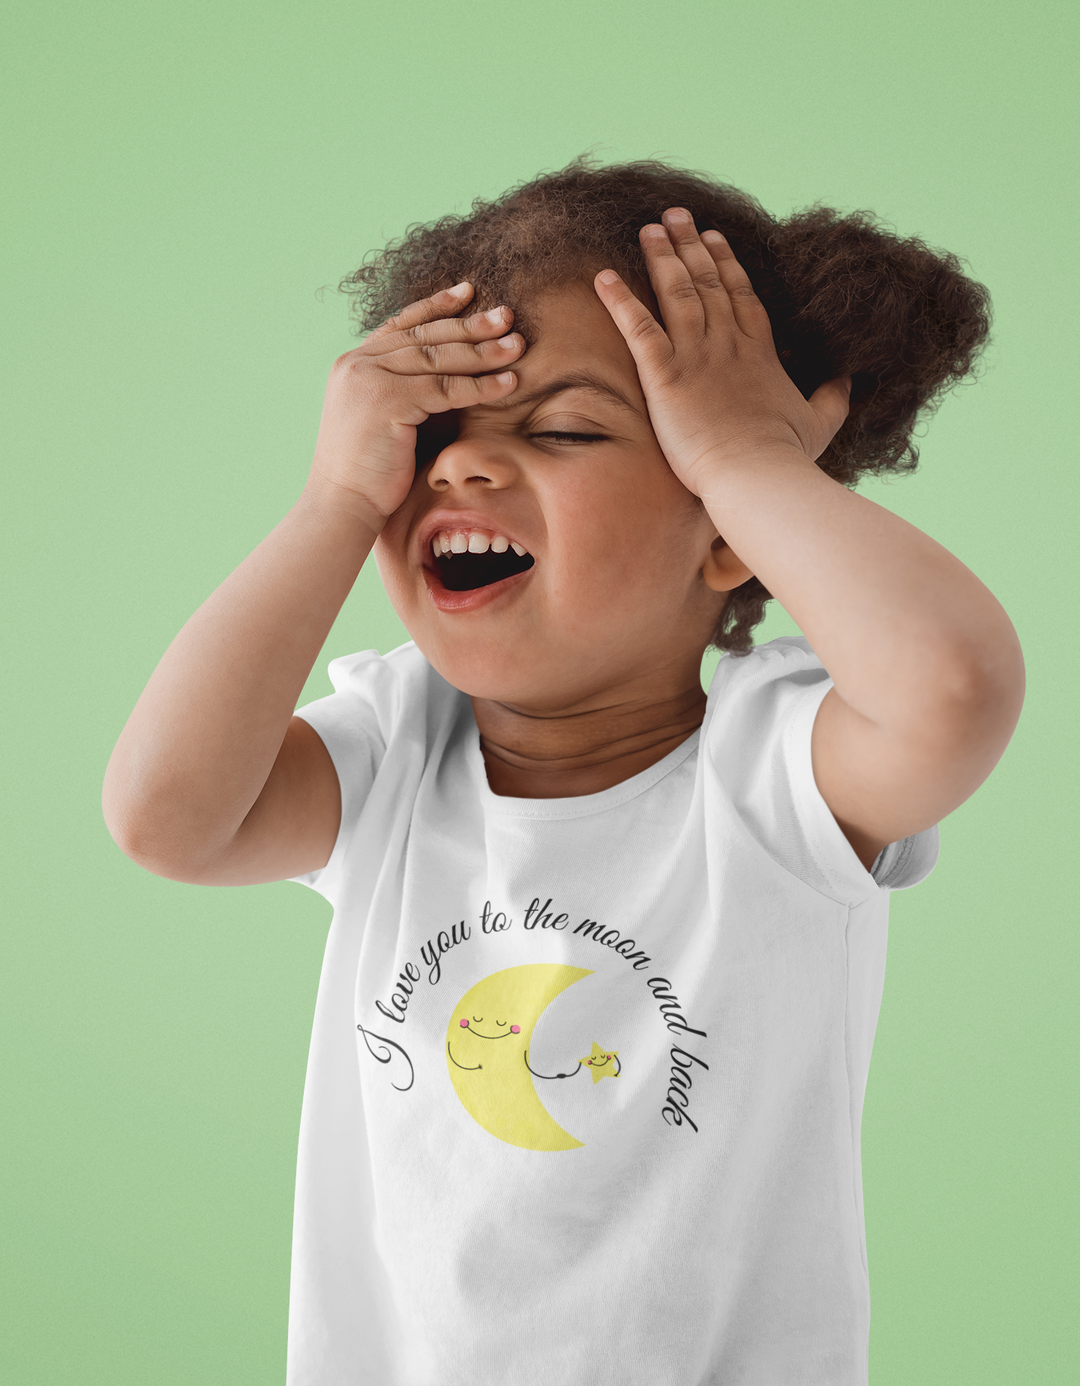 I love you to the moon and back. Short sleeve t shirt for toddler or kids. - TeesForToddlersandKids -  t-shirt - seasons, summer - i-love-you-to-the-moon-and-back-short-sleeve-t-shirt-for-toddler-or-kids